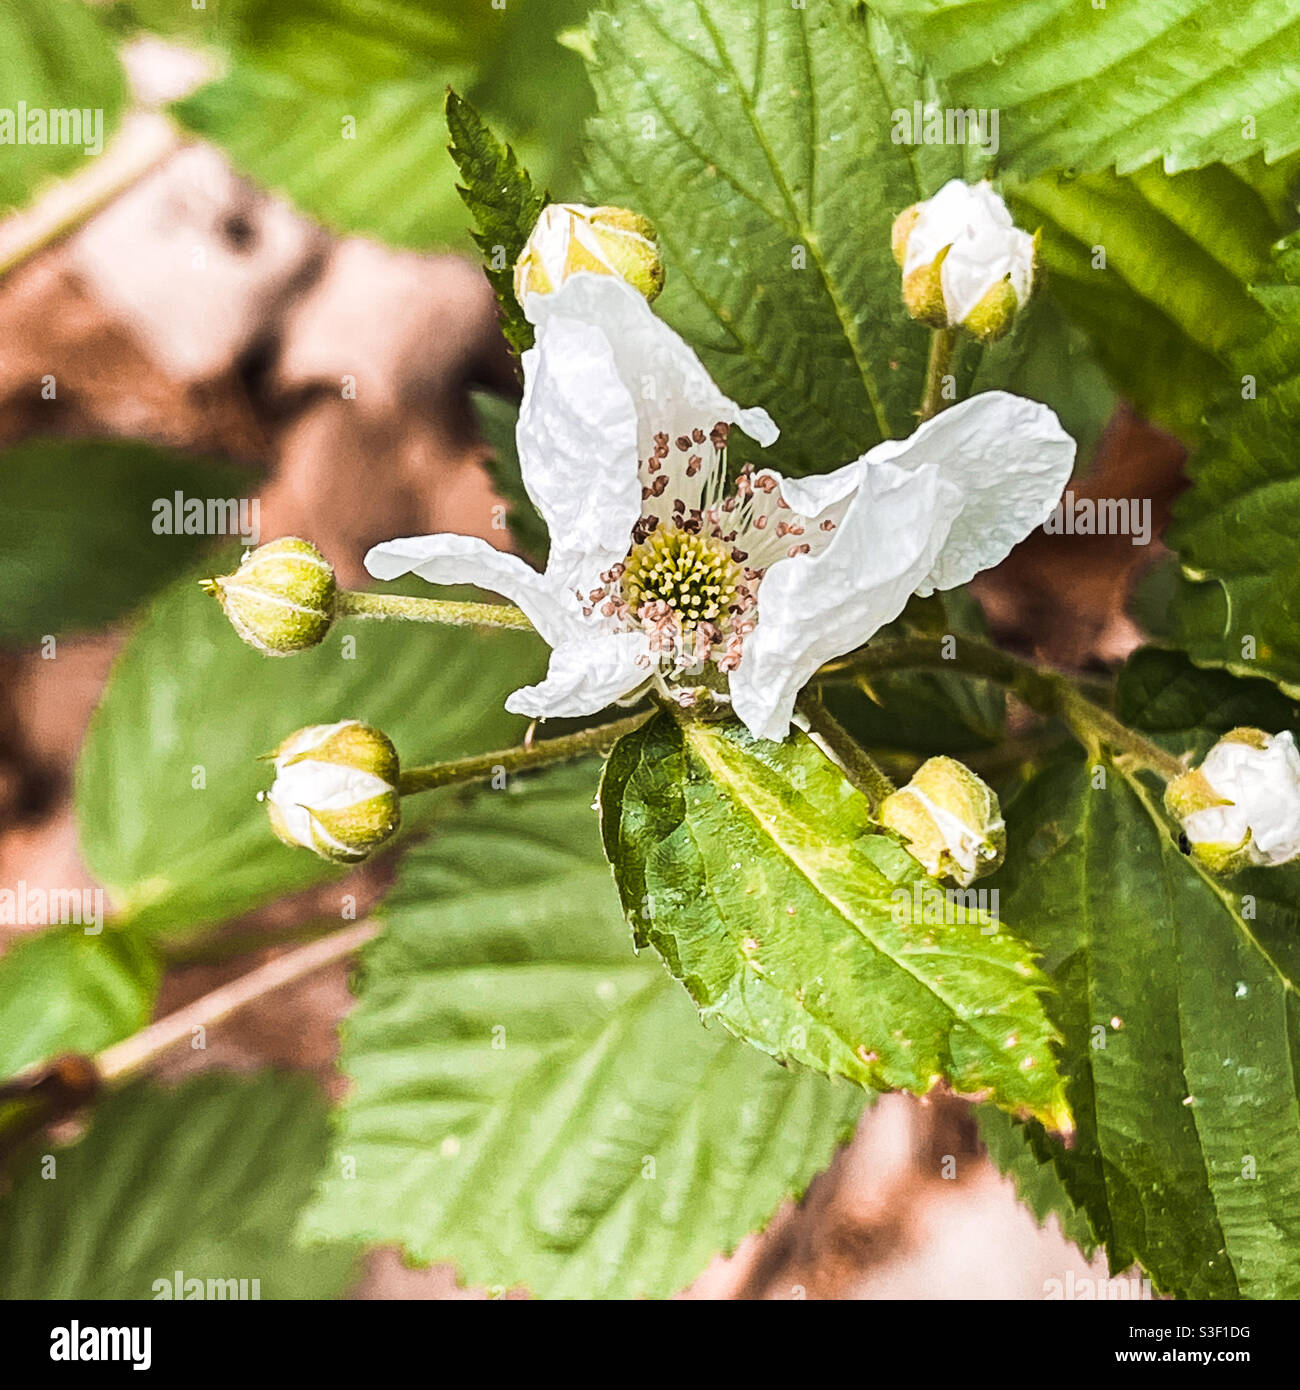 Blackberry flower open and ready for pollination Stock Photo